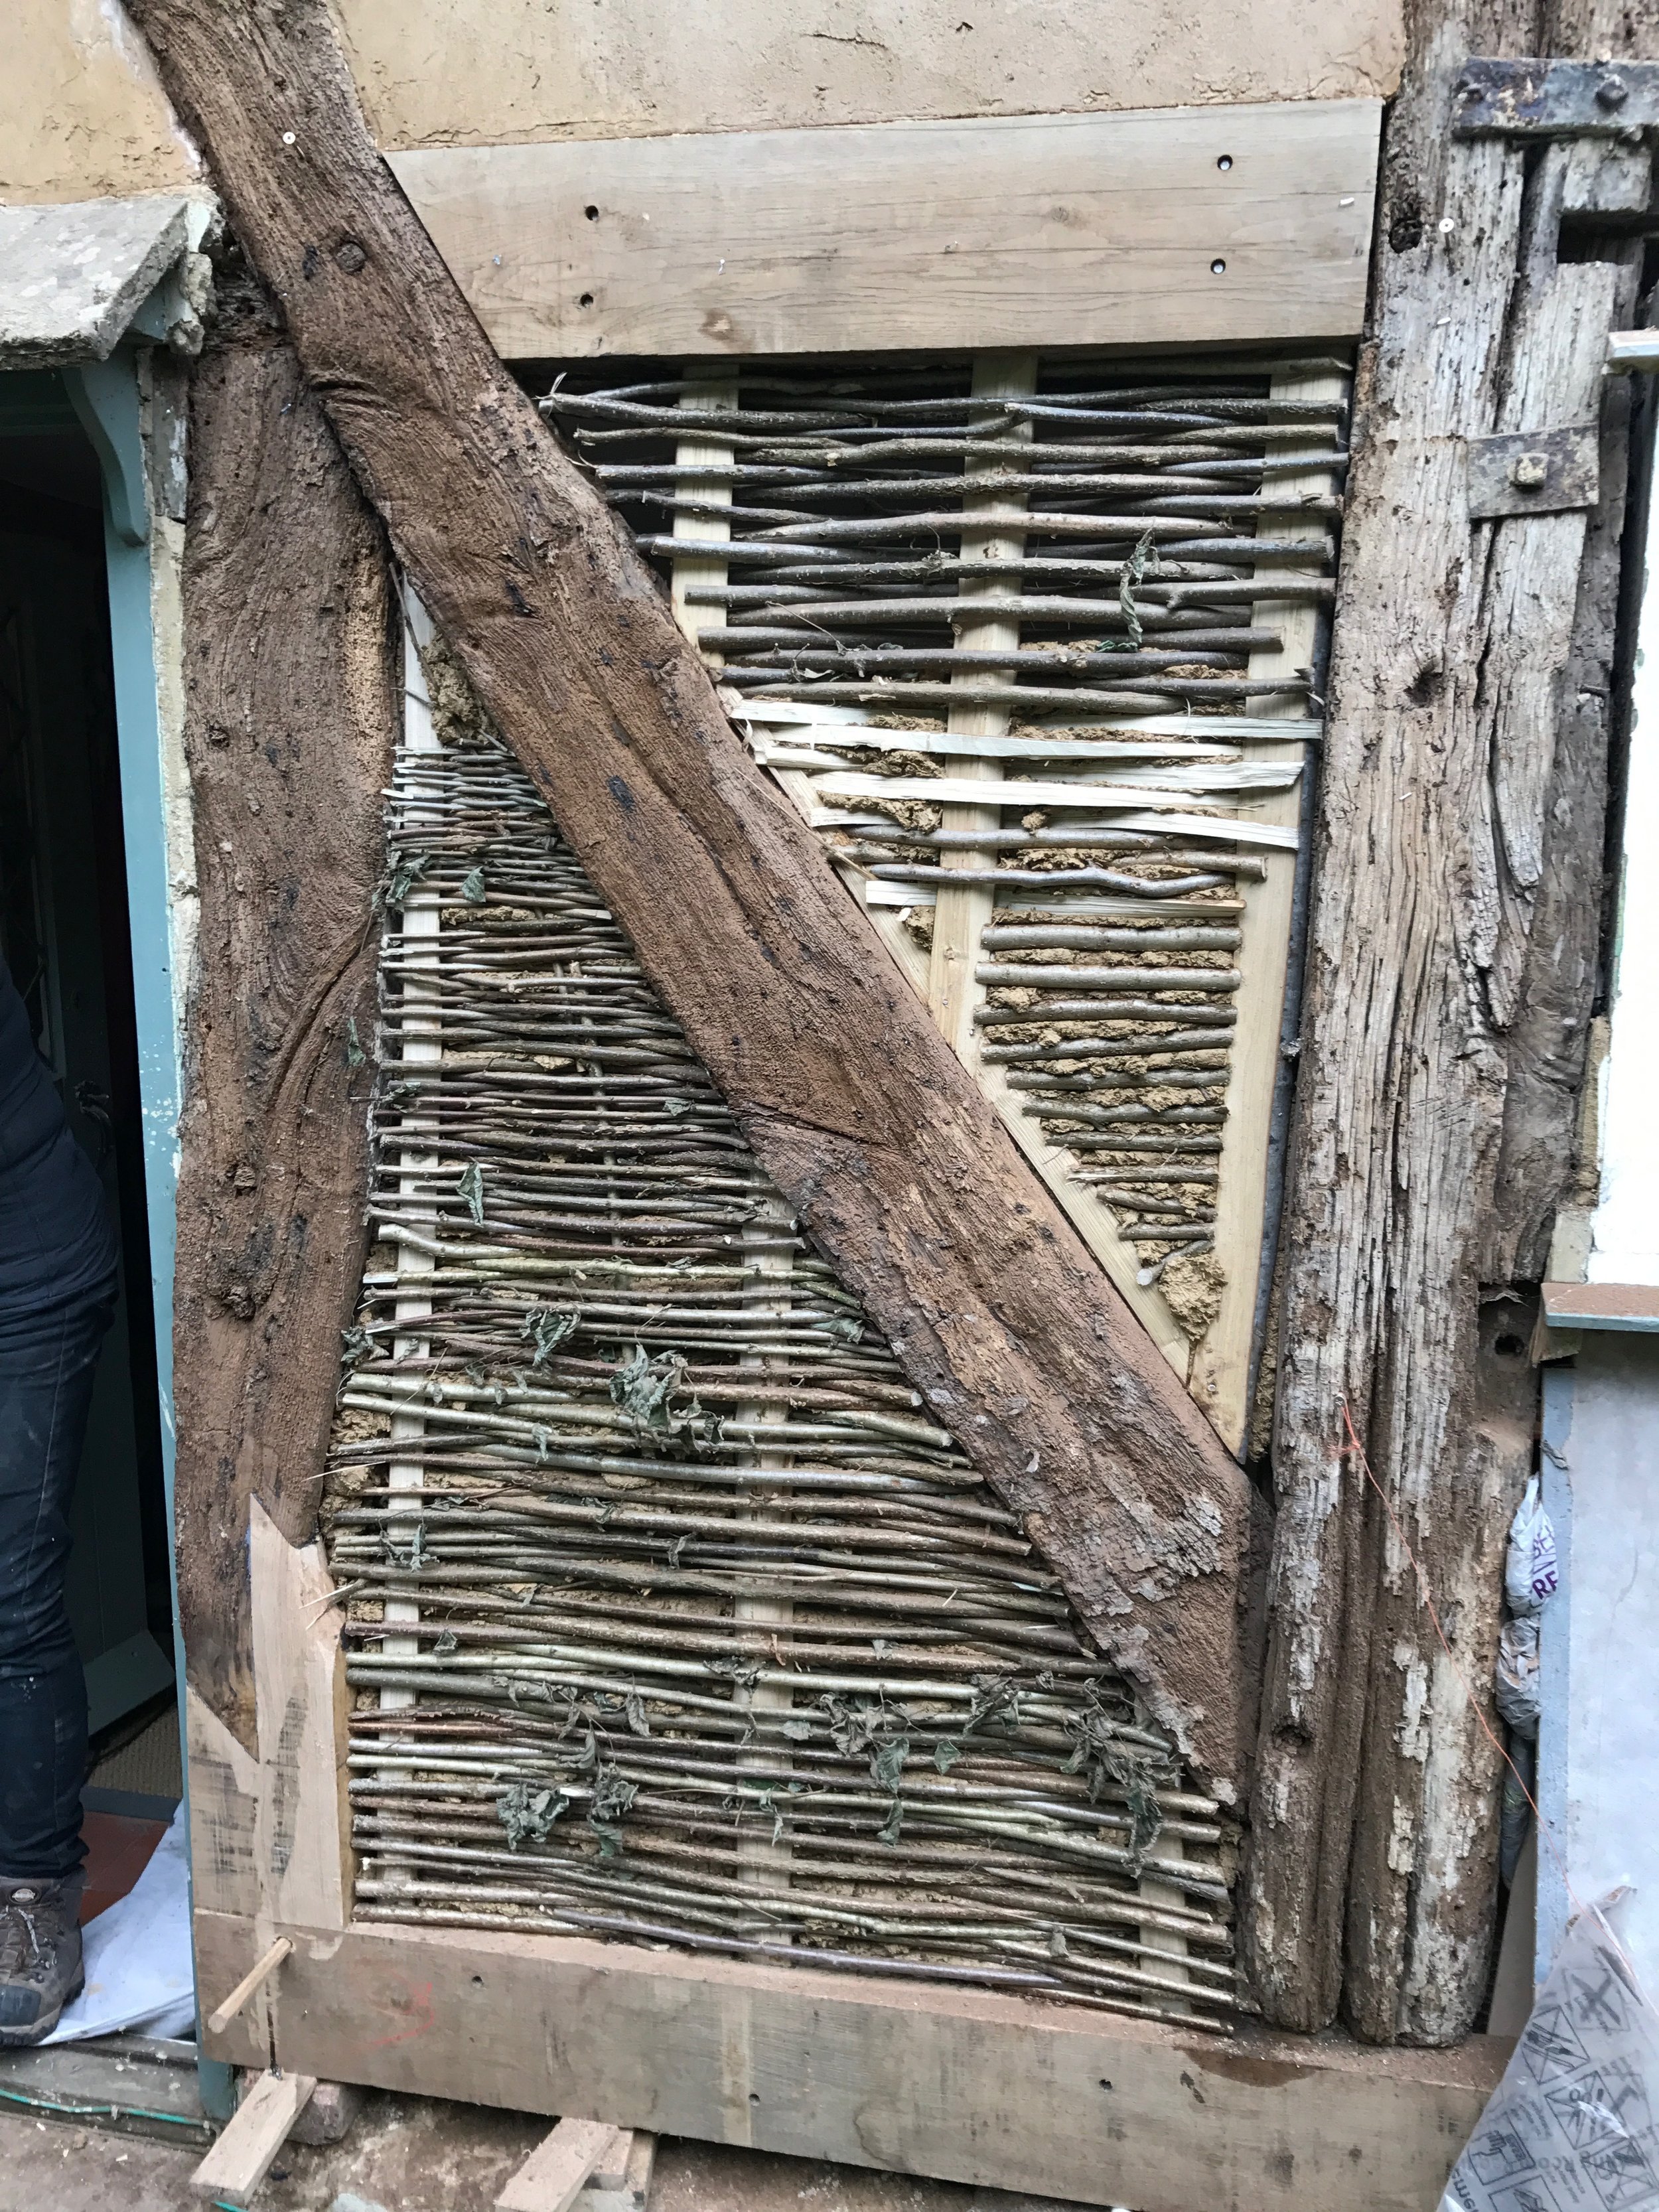 Re-placement wattle ready for daub